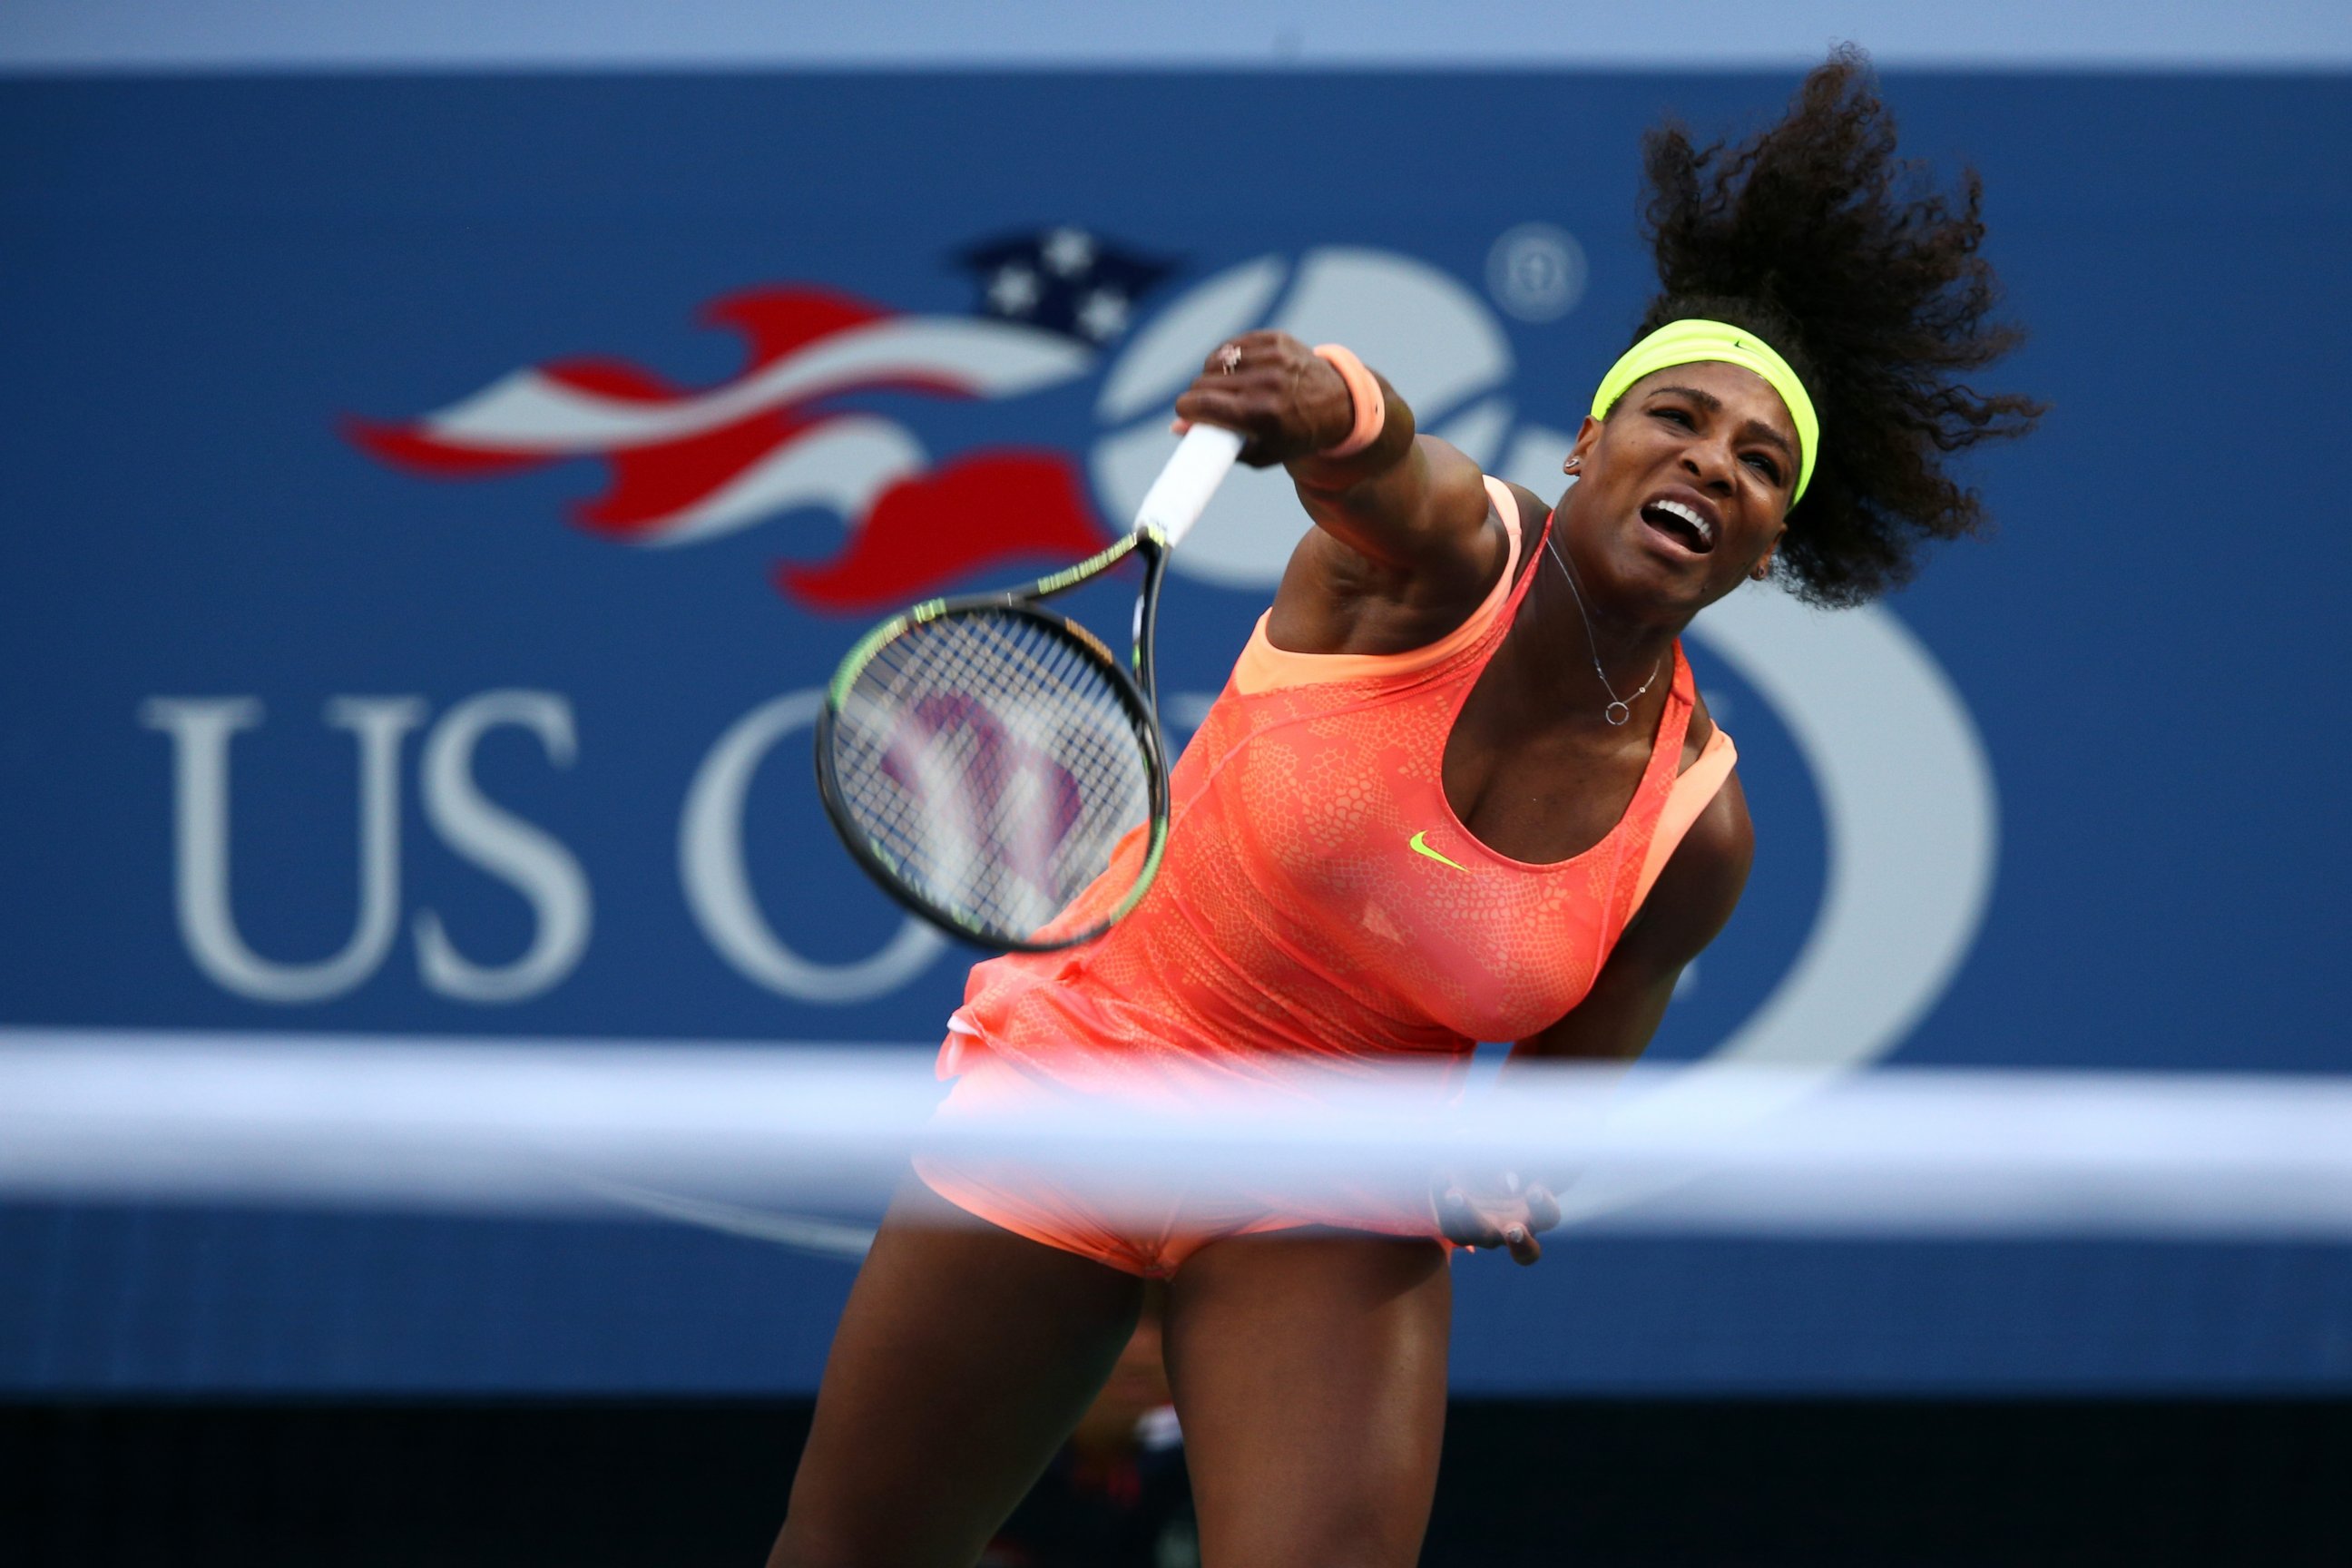 PHOTO: Serena Williams of the United States serves to Madison Keys of the United States during their Women's Singles match at the US Open on Sept. 6, 2015 in New York.